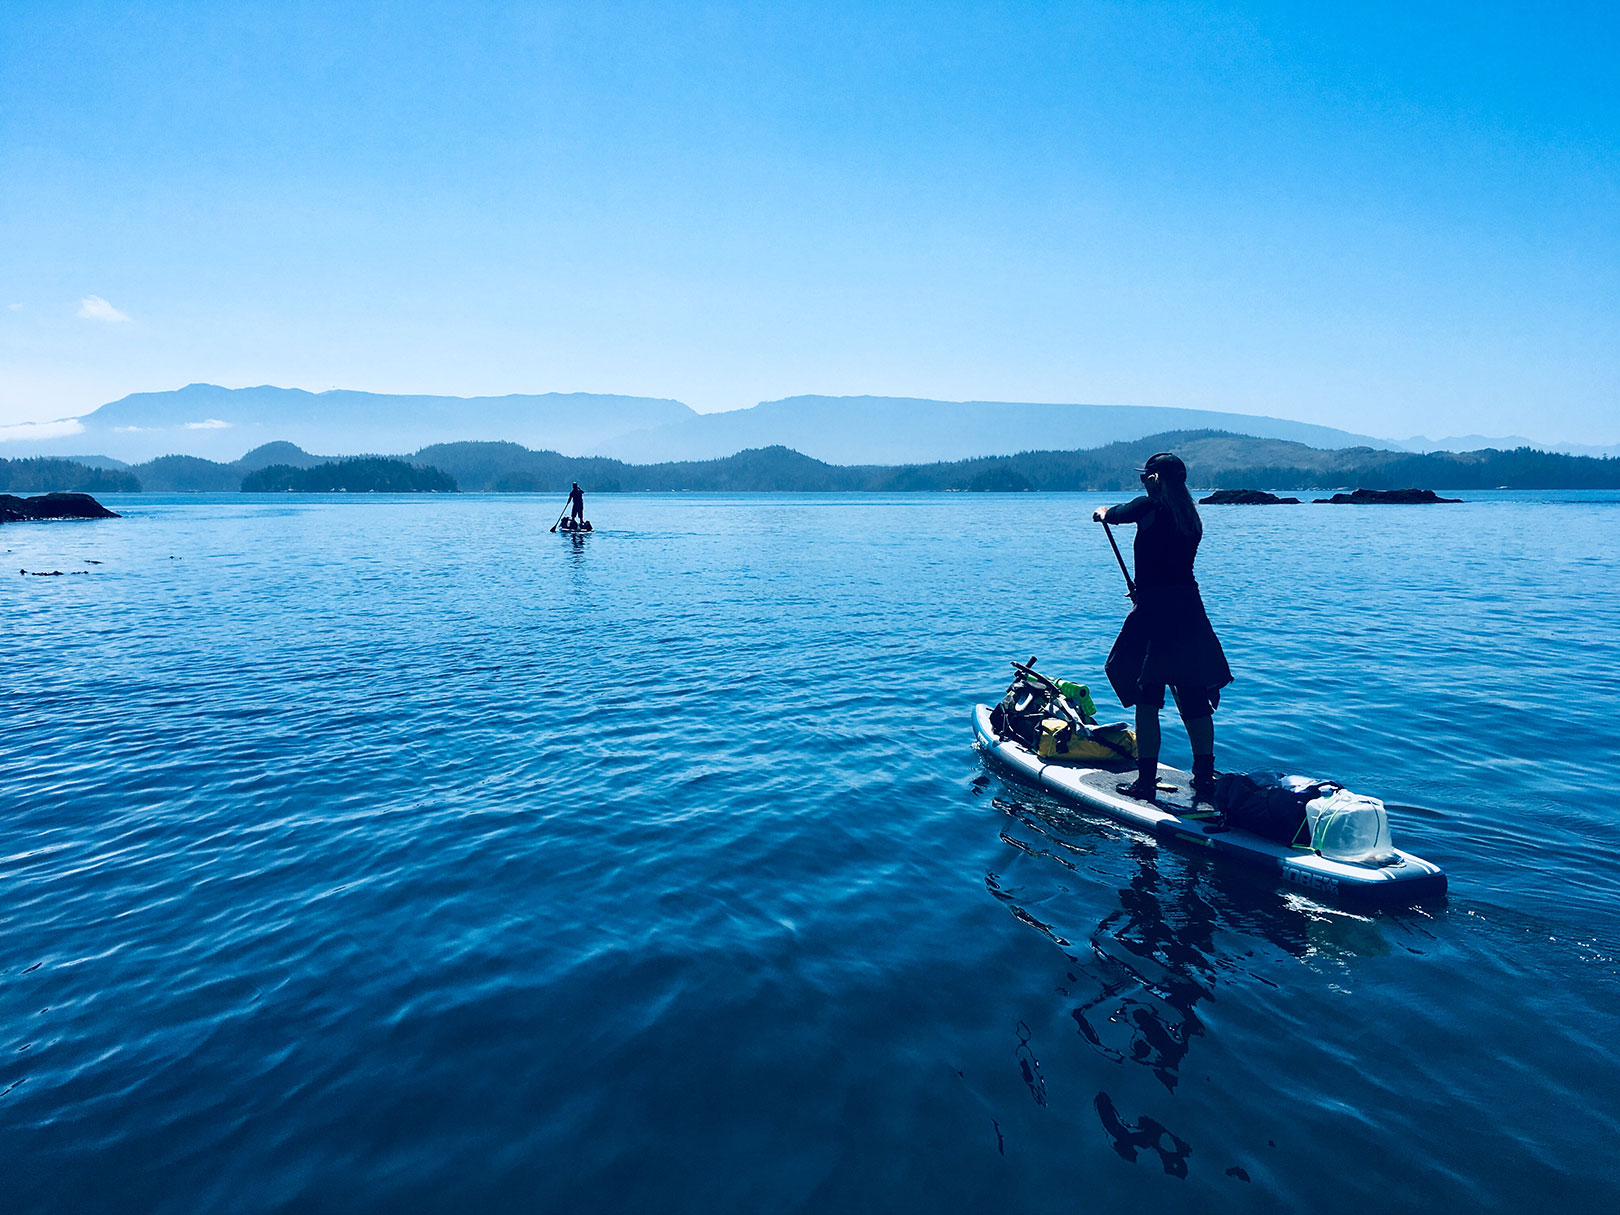 A story of an adventure to the remote Broughton Archipelago 